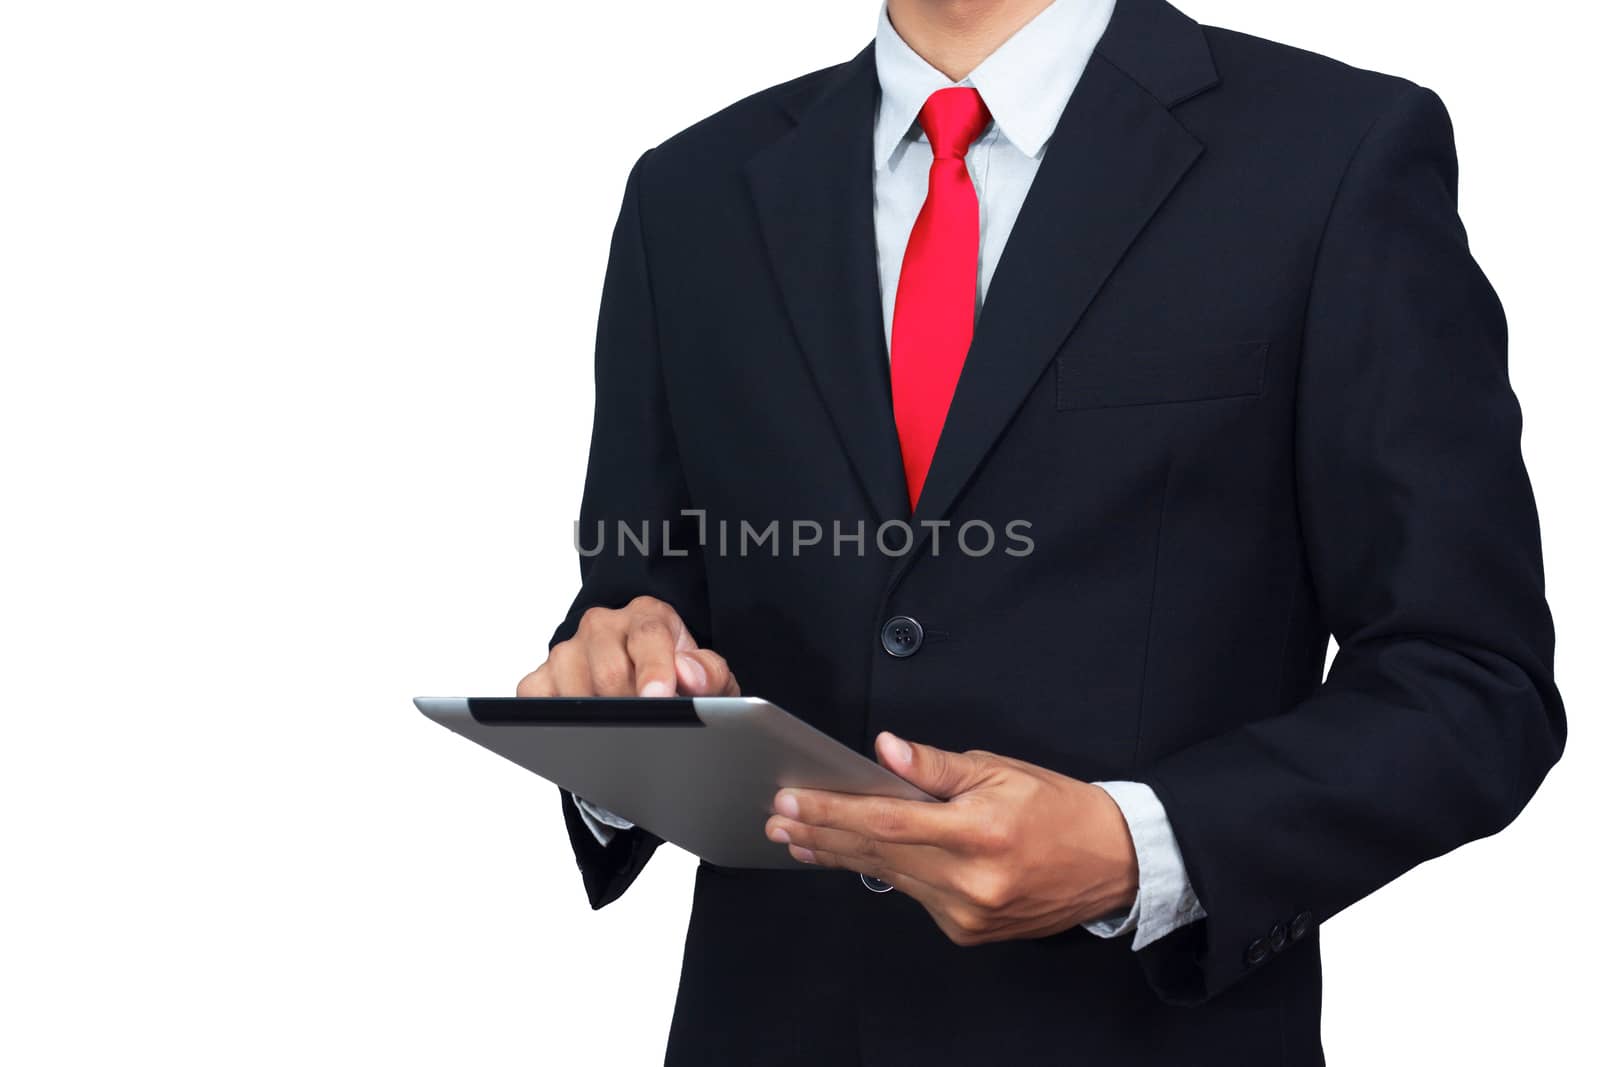 tablet technology for business concept. businessman using tablet, clipping path include by asiandelight